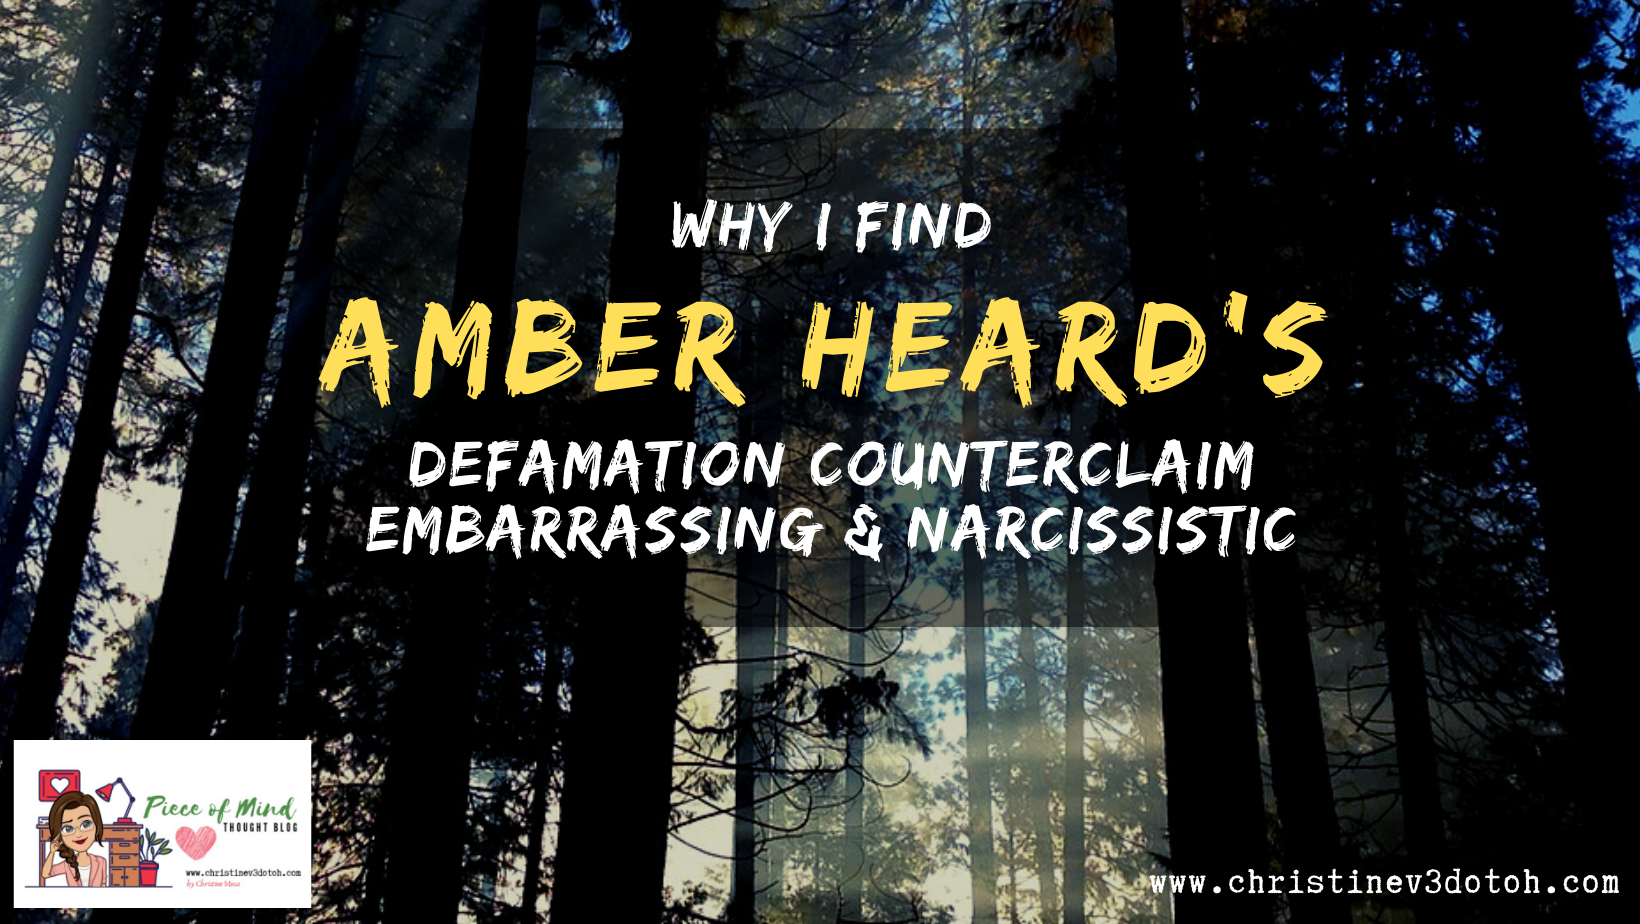 Why I Find Amber Heard’s Defamation Counterclaim Embarrassing and Narcissistic